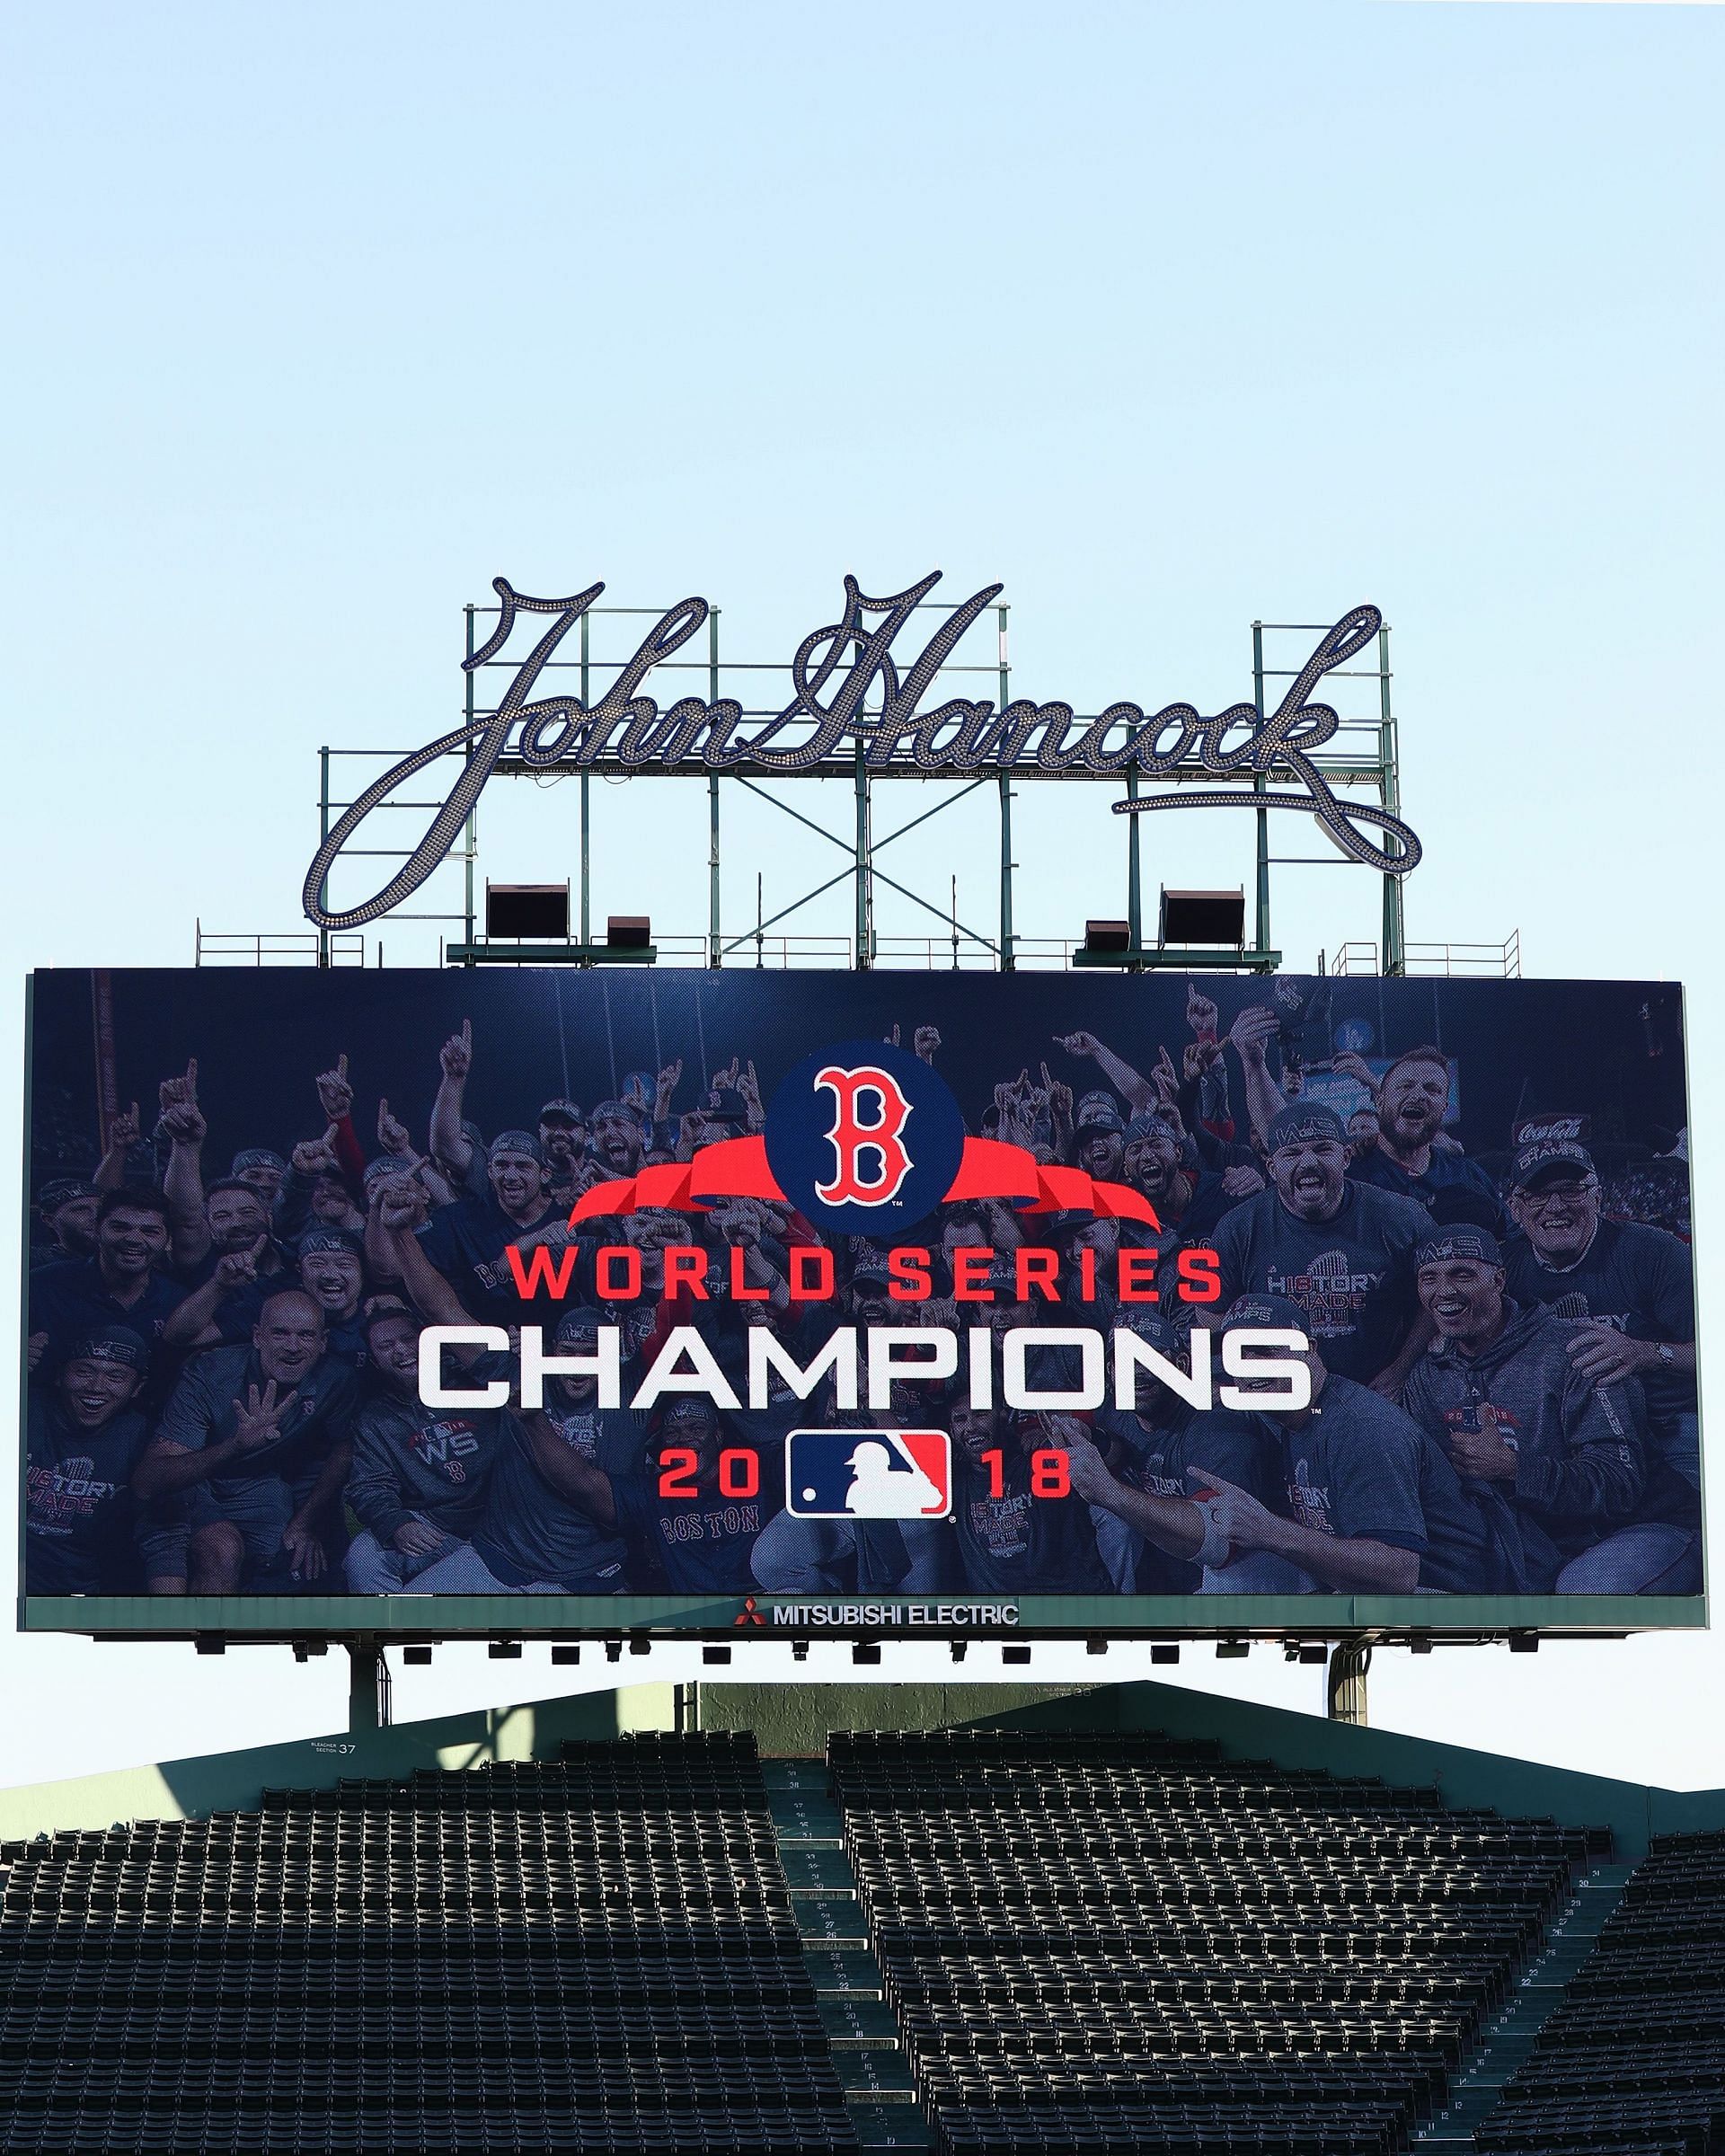 Boston Red Sox Victory Parade: BOSTON, MA - OCTOBER 31: World Series Champions 2018 Signage in the outfield before the Boston Red Sox Victory Parade at Fenway Park on October 31, 2018 in Boston, Massachusetts. (Photo by Omar Rawlings/Getty Images)